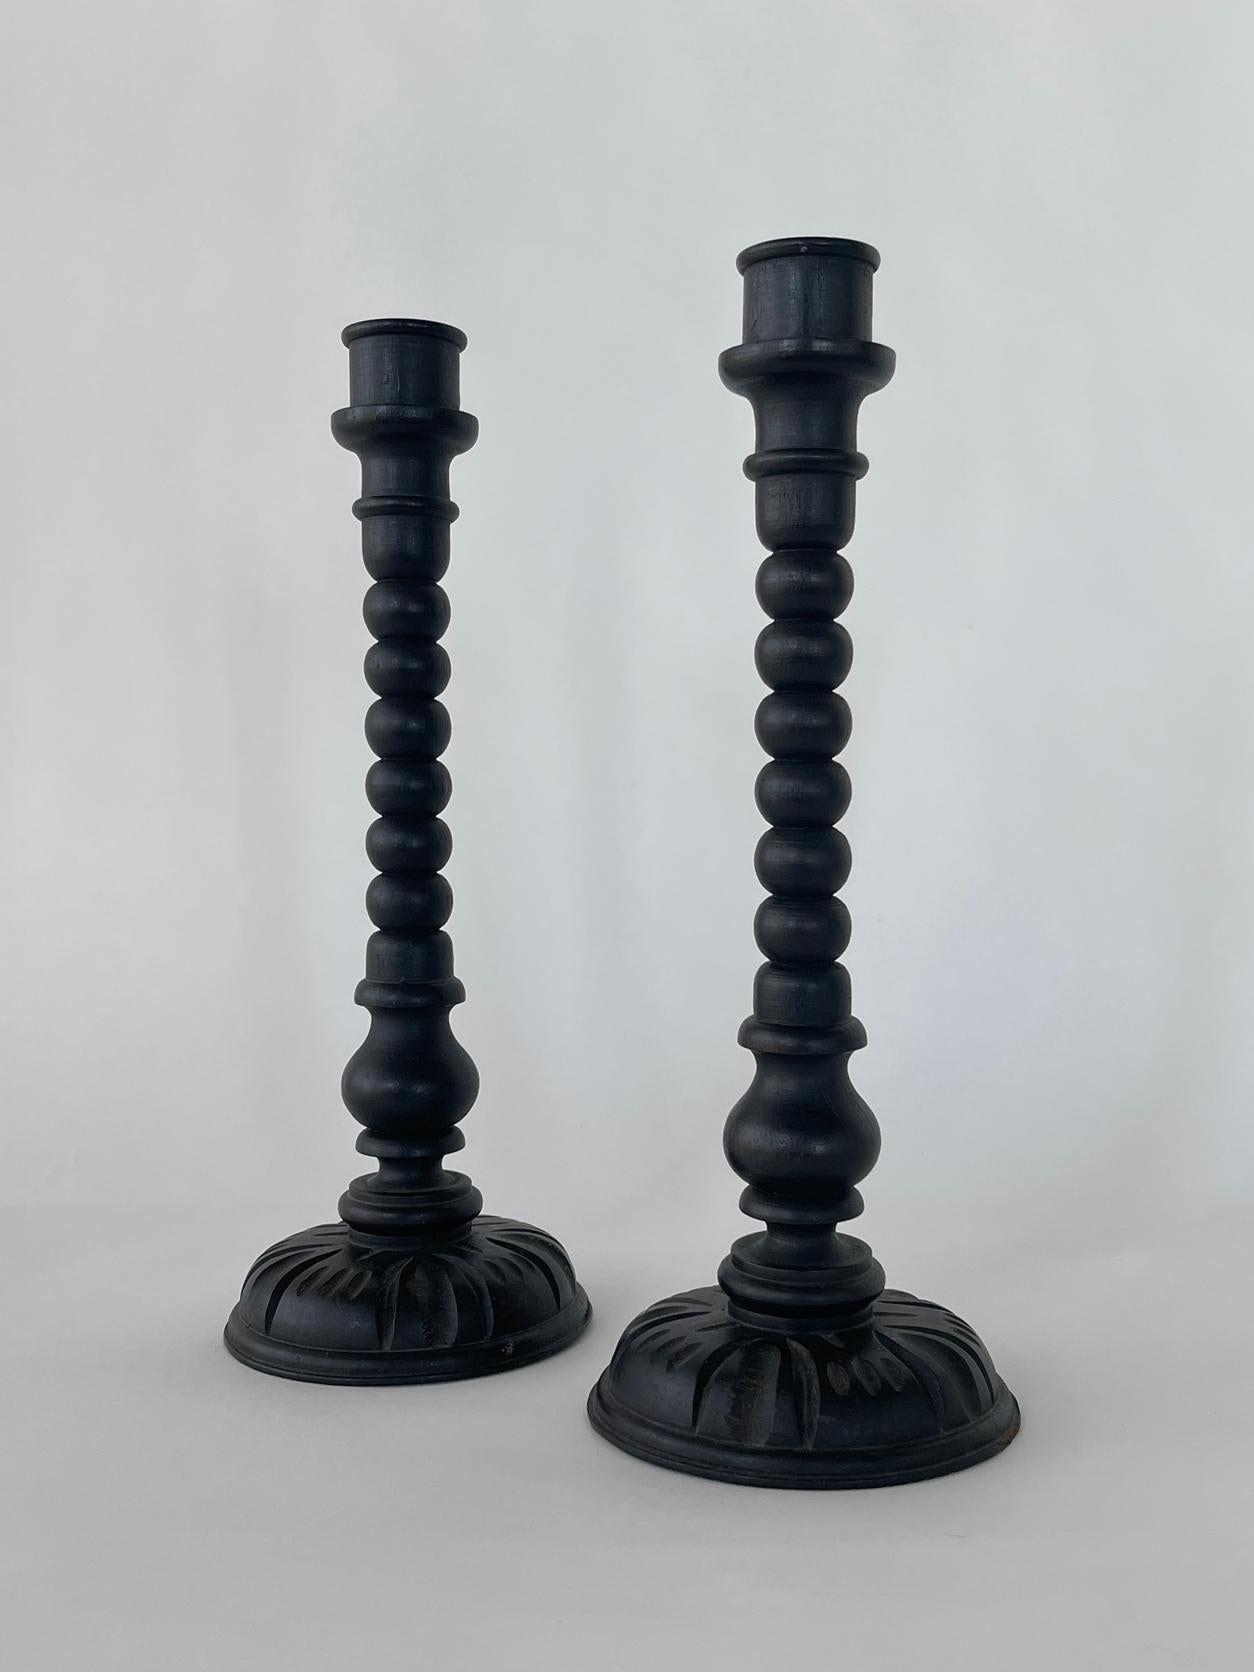 Hand-Crafted 20th Century Brutalist Candle Stick Holders